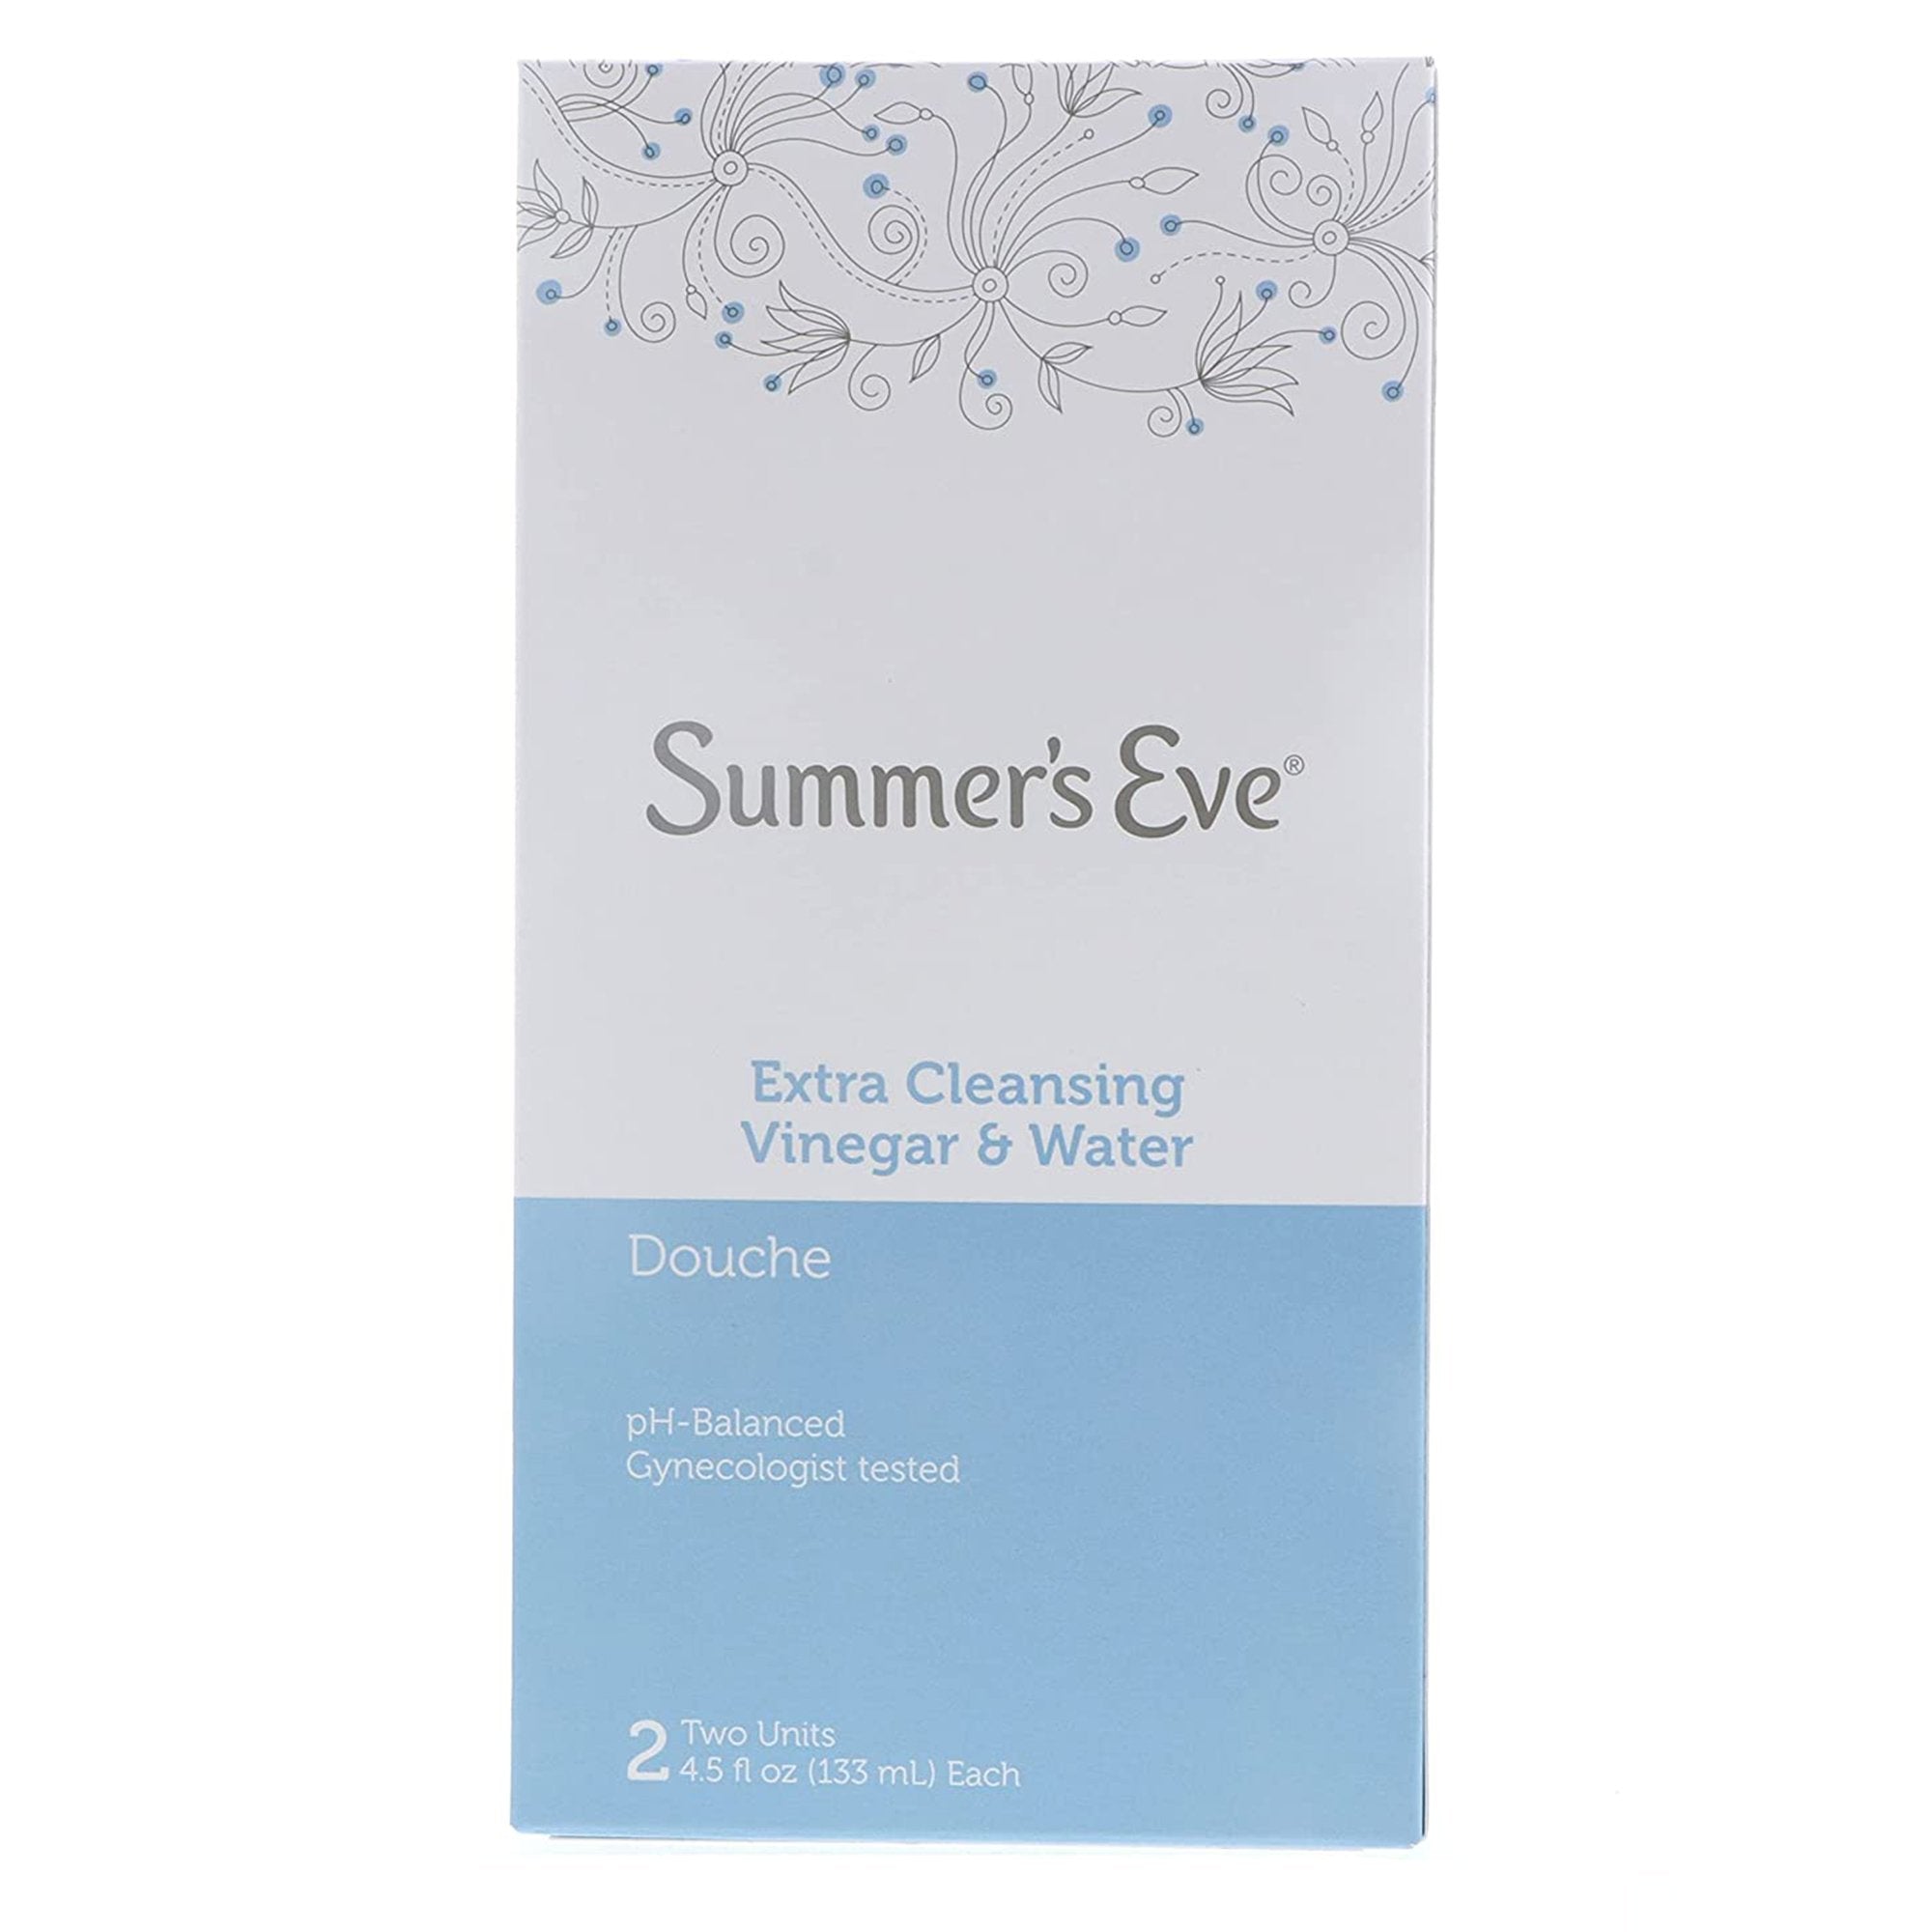 Douche Summer's Eve® Vinegar and Water 4.5 oz.